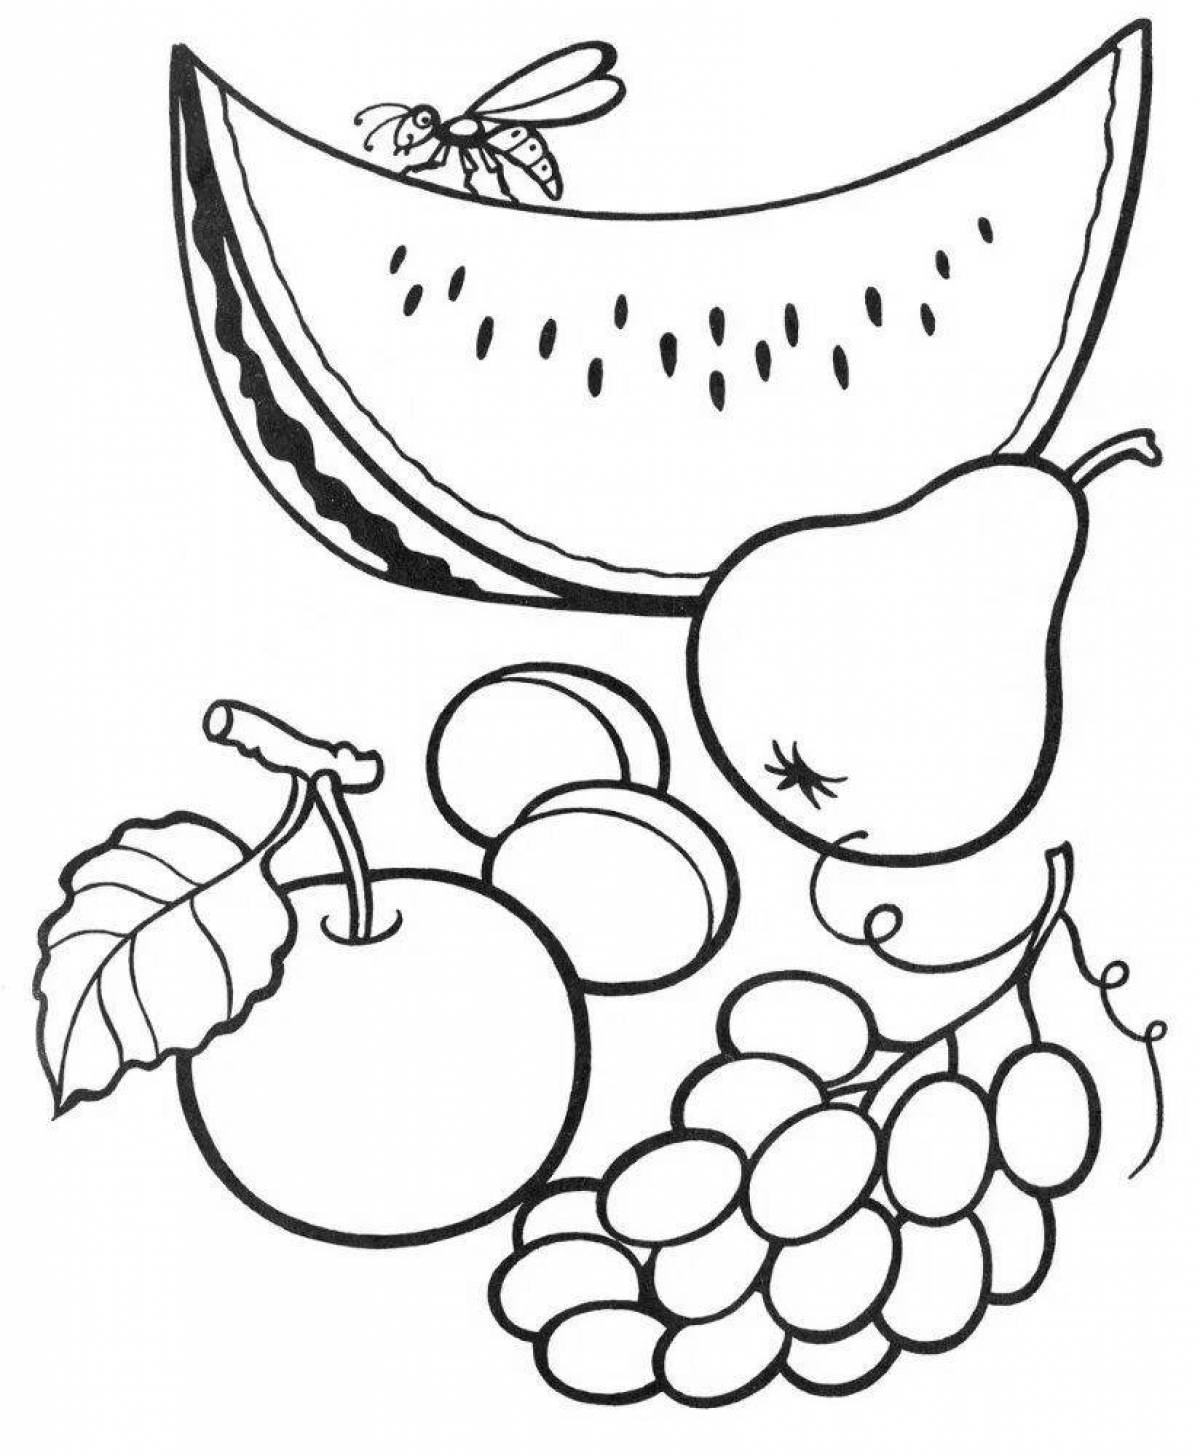 Tempting fruits and vegetables coloring book